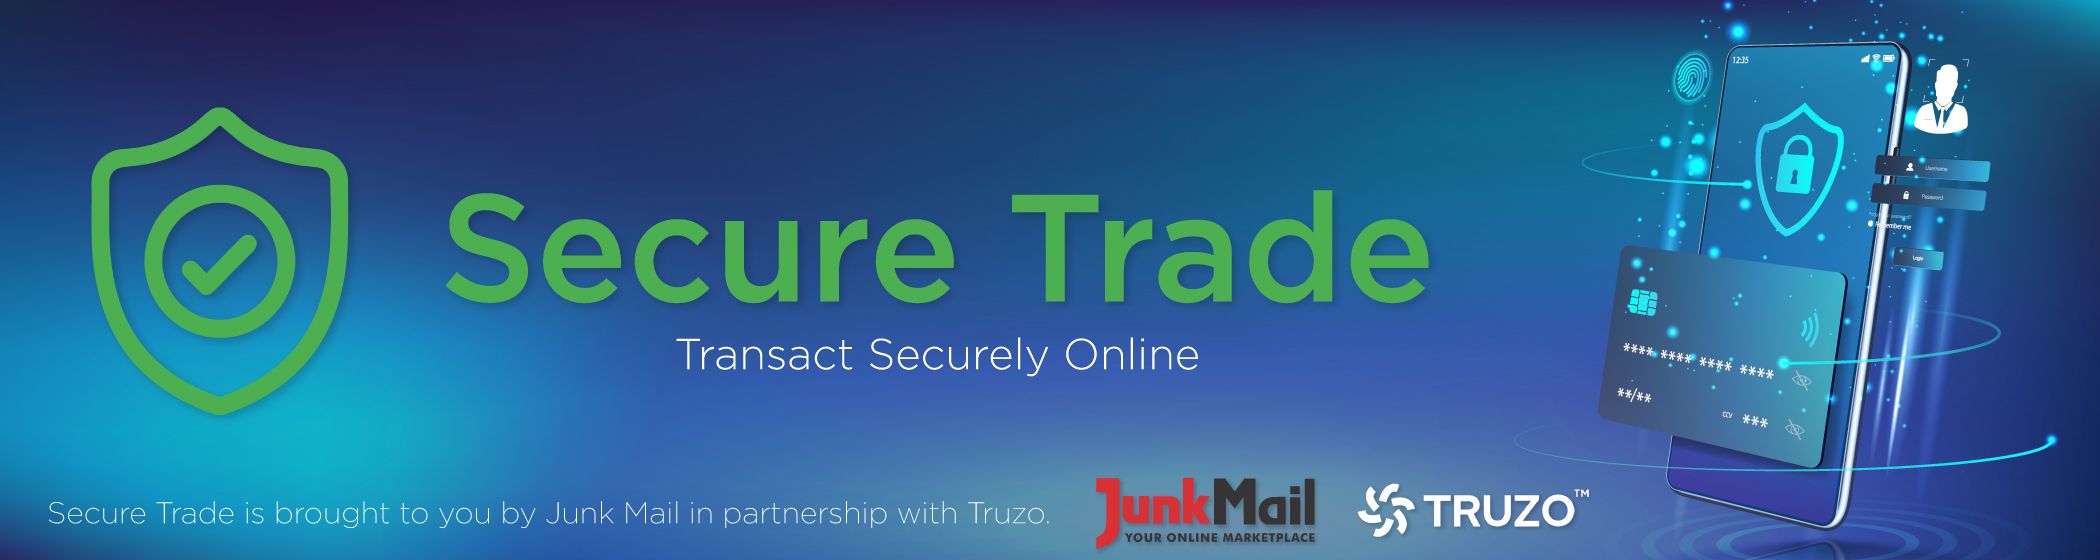 Secure Trade on Junk Mail powered by Truzo